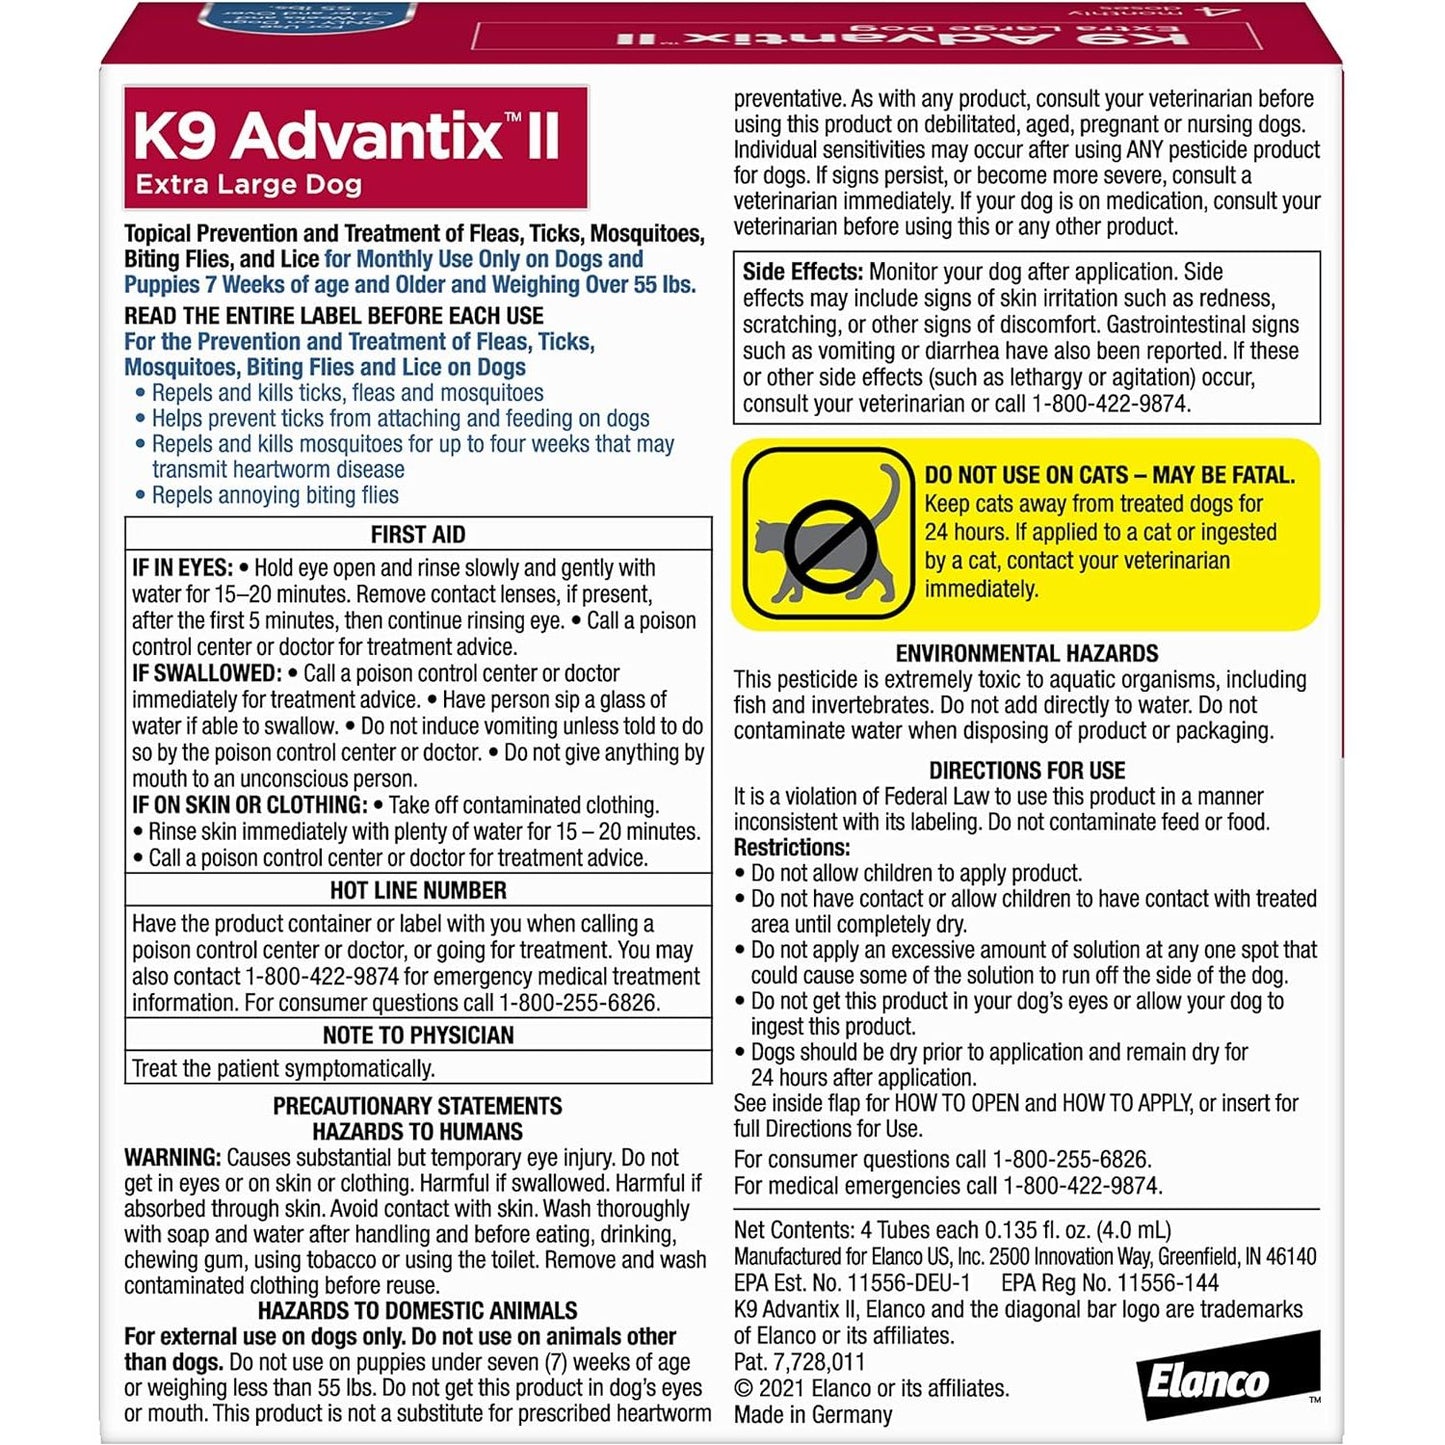 K9 Advantix II XL Dog Vet-Recommended Flea, Tick & Mosquito Treatment & Prevention | Dogs Over 55 lbs. | 6-Mo Supply